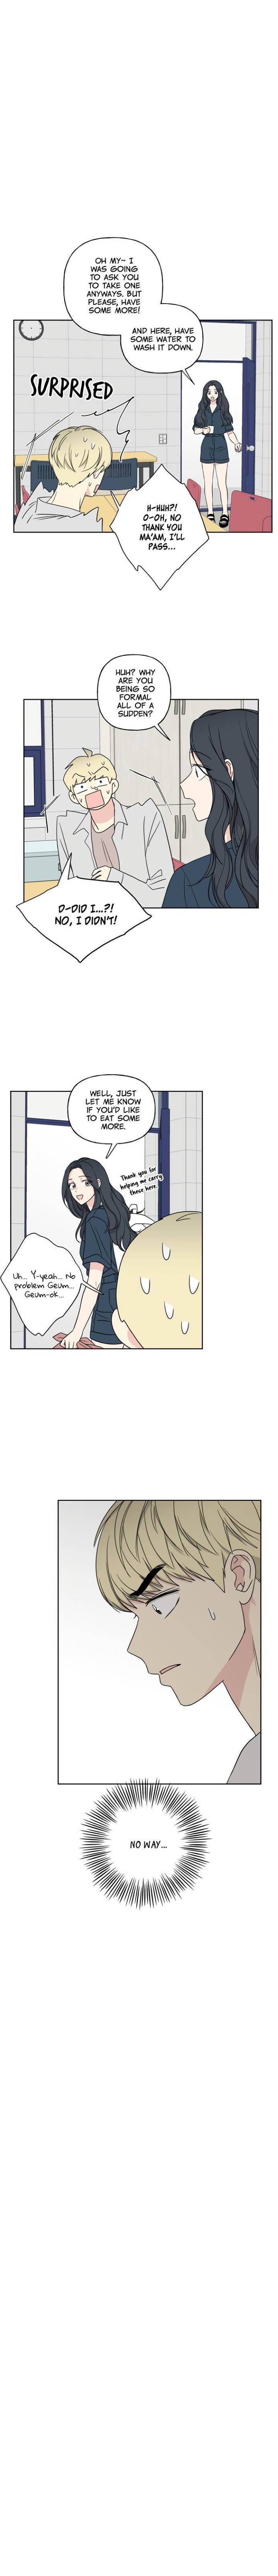 mother-im-sorry-chap-21-5